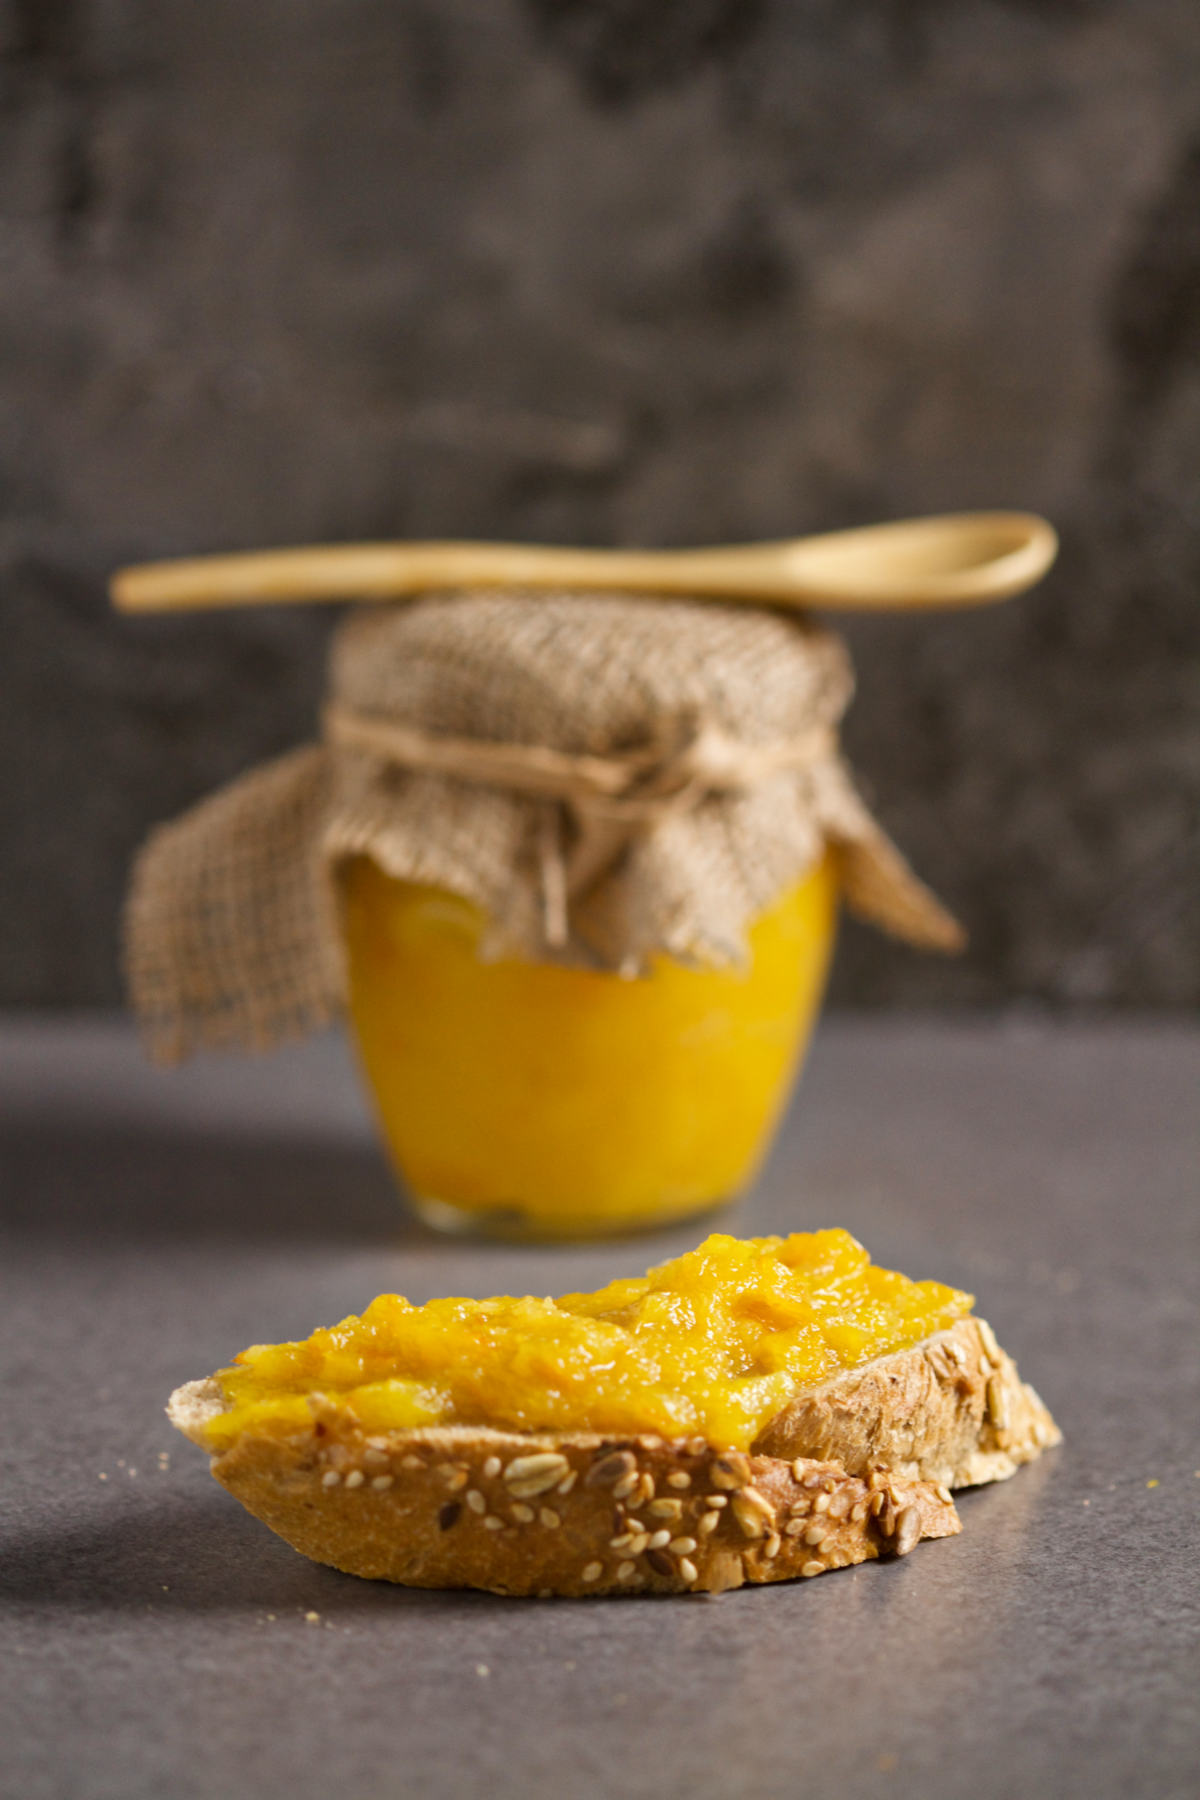 A piece of integral bread with marmalade and a jar of marmalade with a wooden spoon on top, on a gray background.